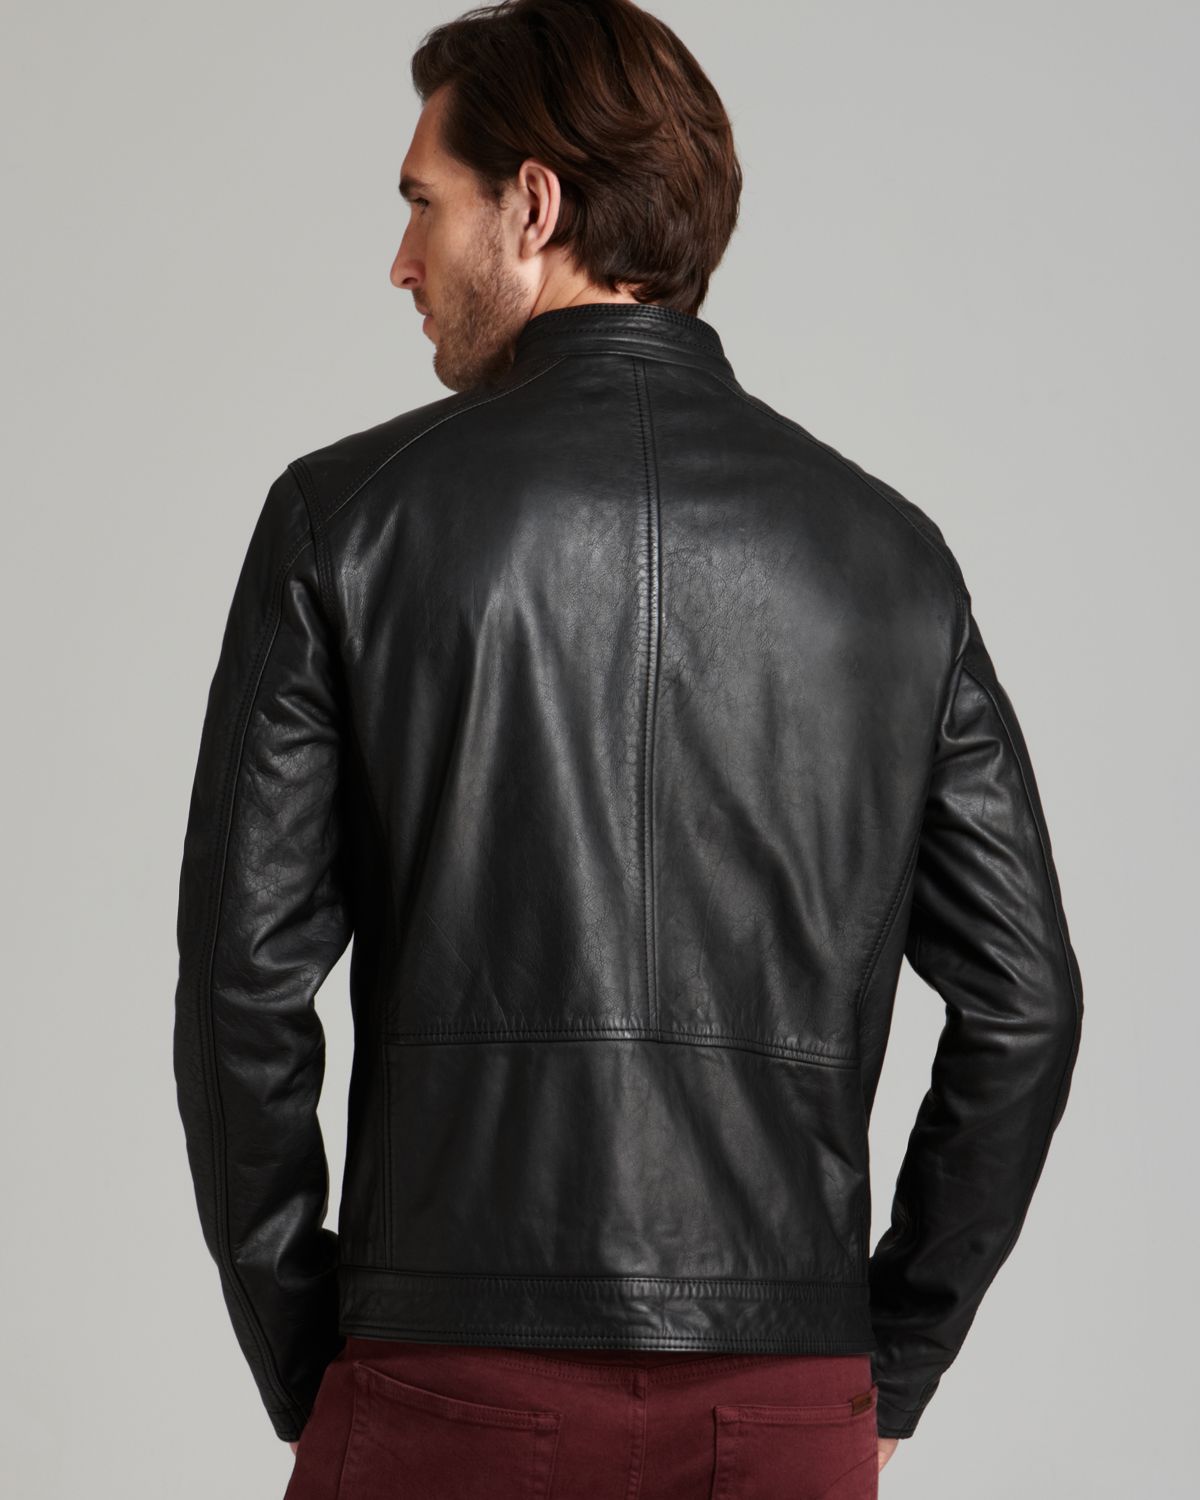 Cole haan Washed Leather Moto Jacket in Black for Men Lyst